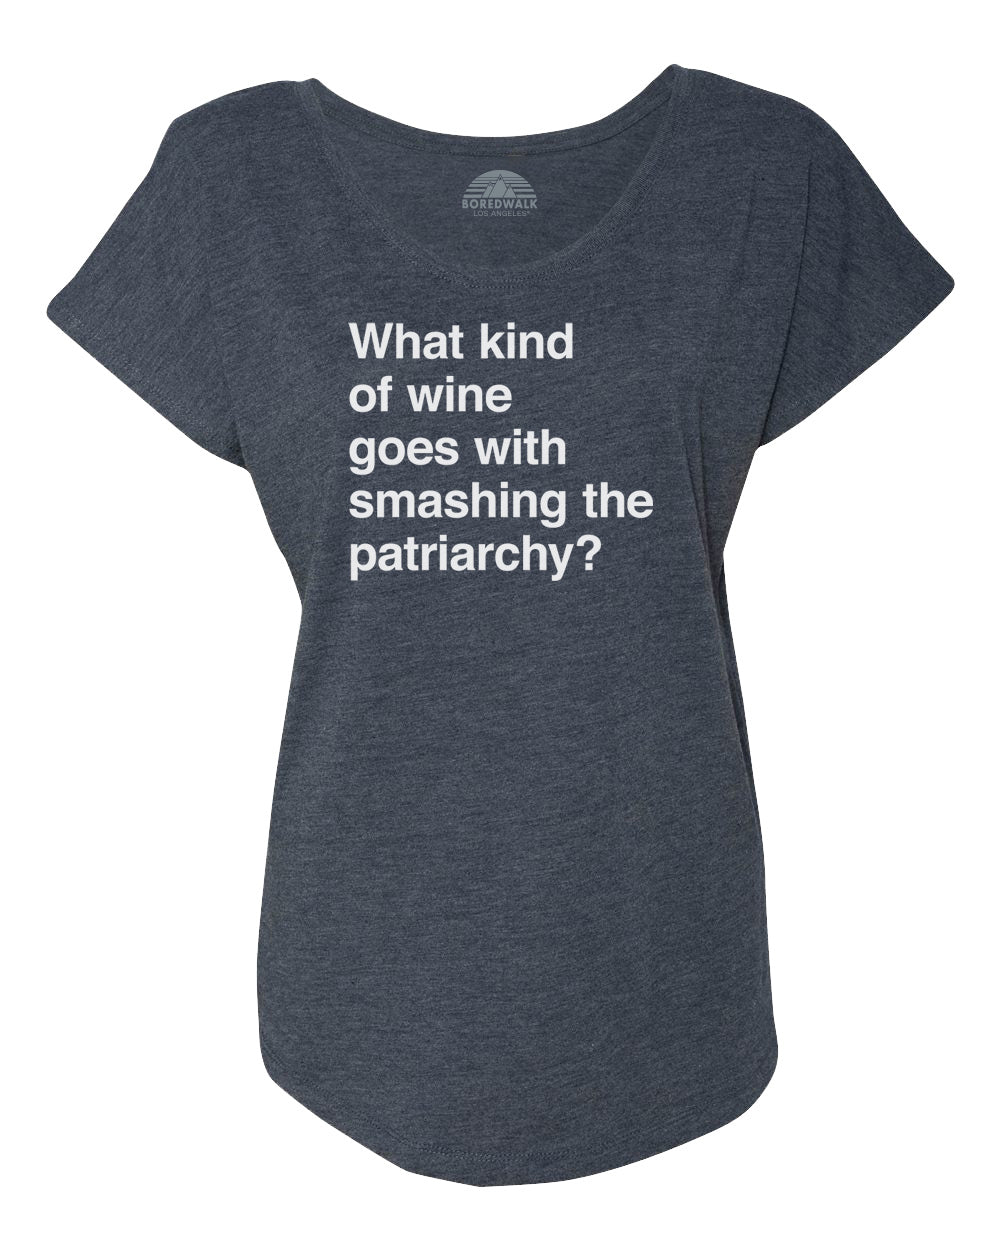 Women's What Kind of Wine Goes with Smashing the Patriarchy? Scoop Neck T-Shirt